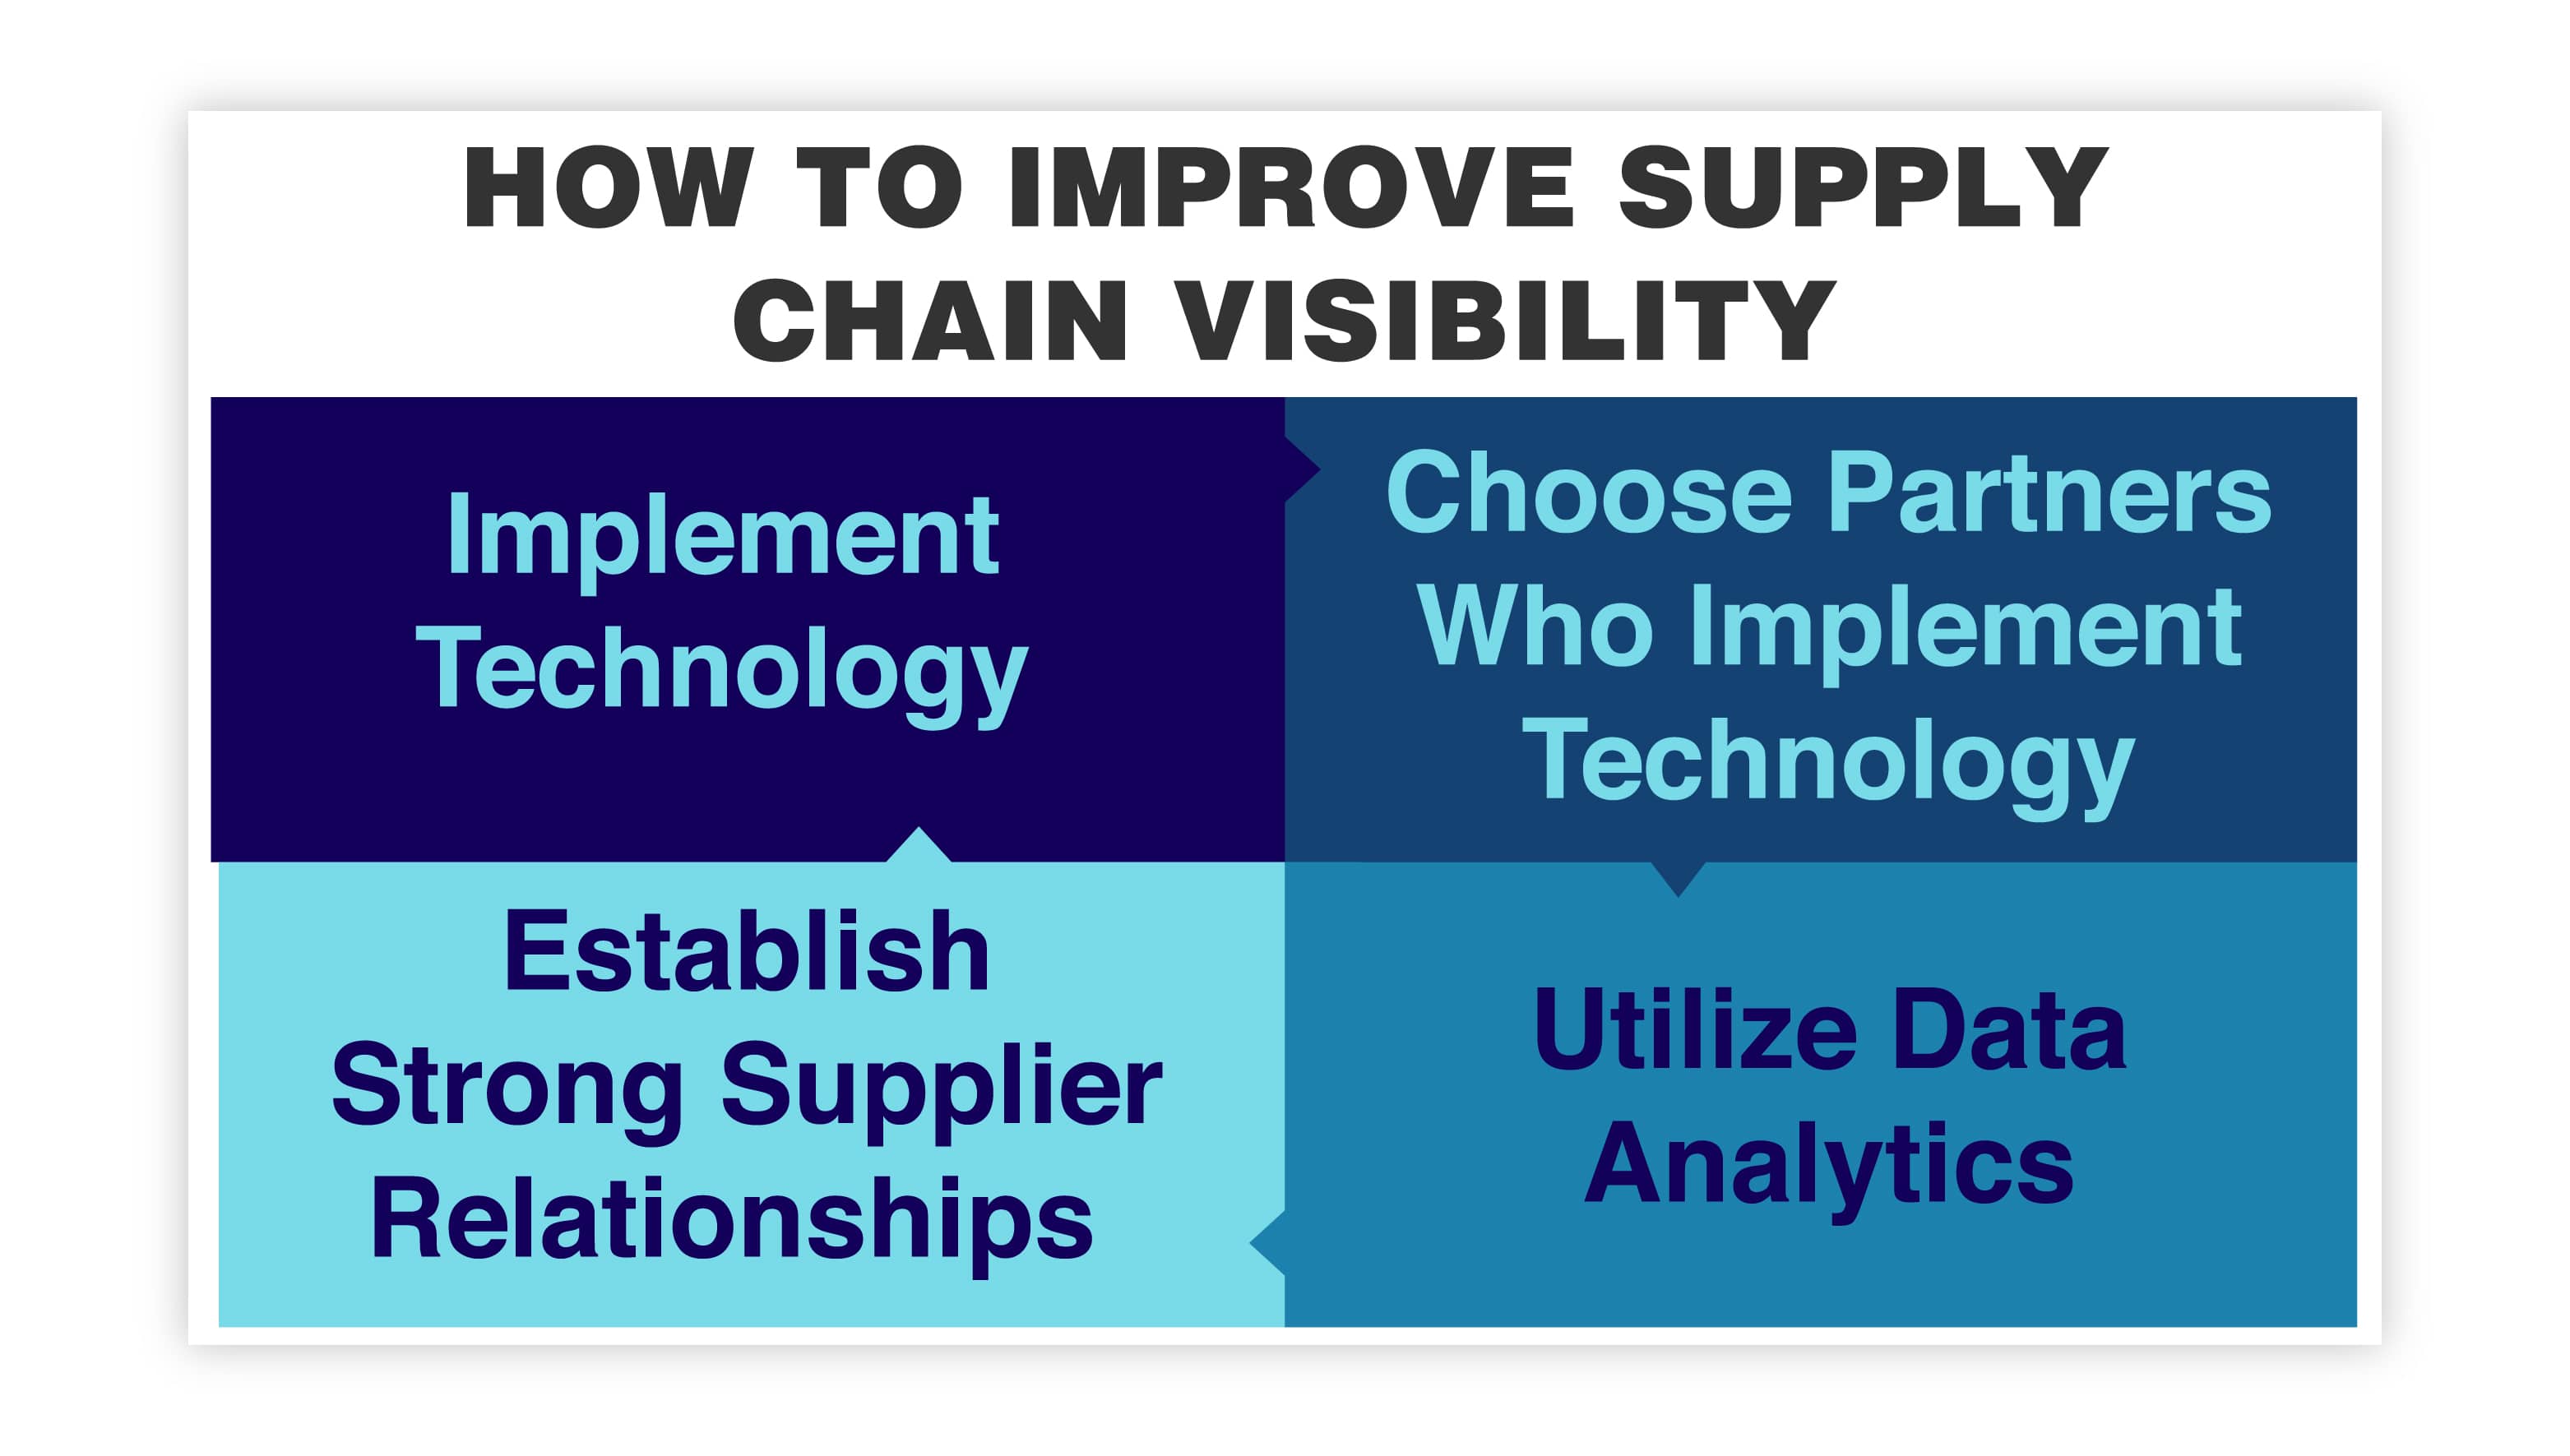 HOW TO IMPROVE SUPPLY CHAIN VISIBILITY